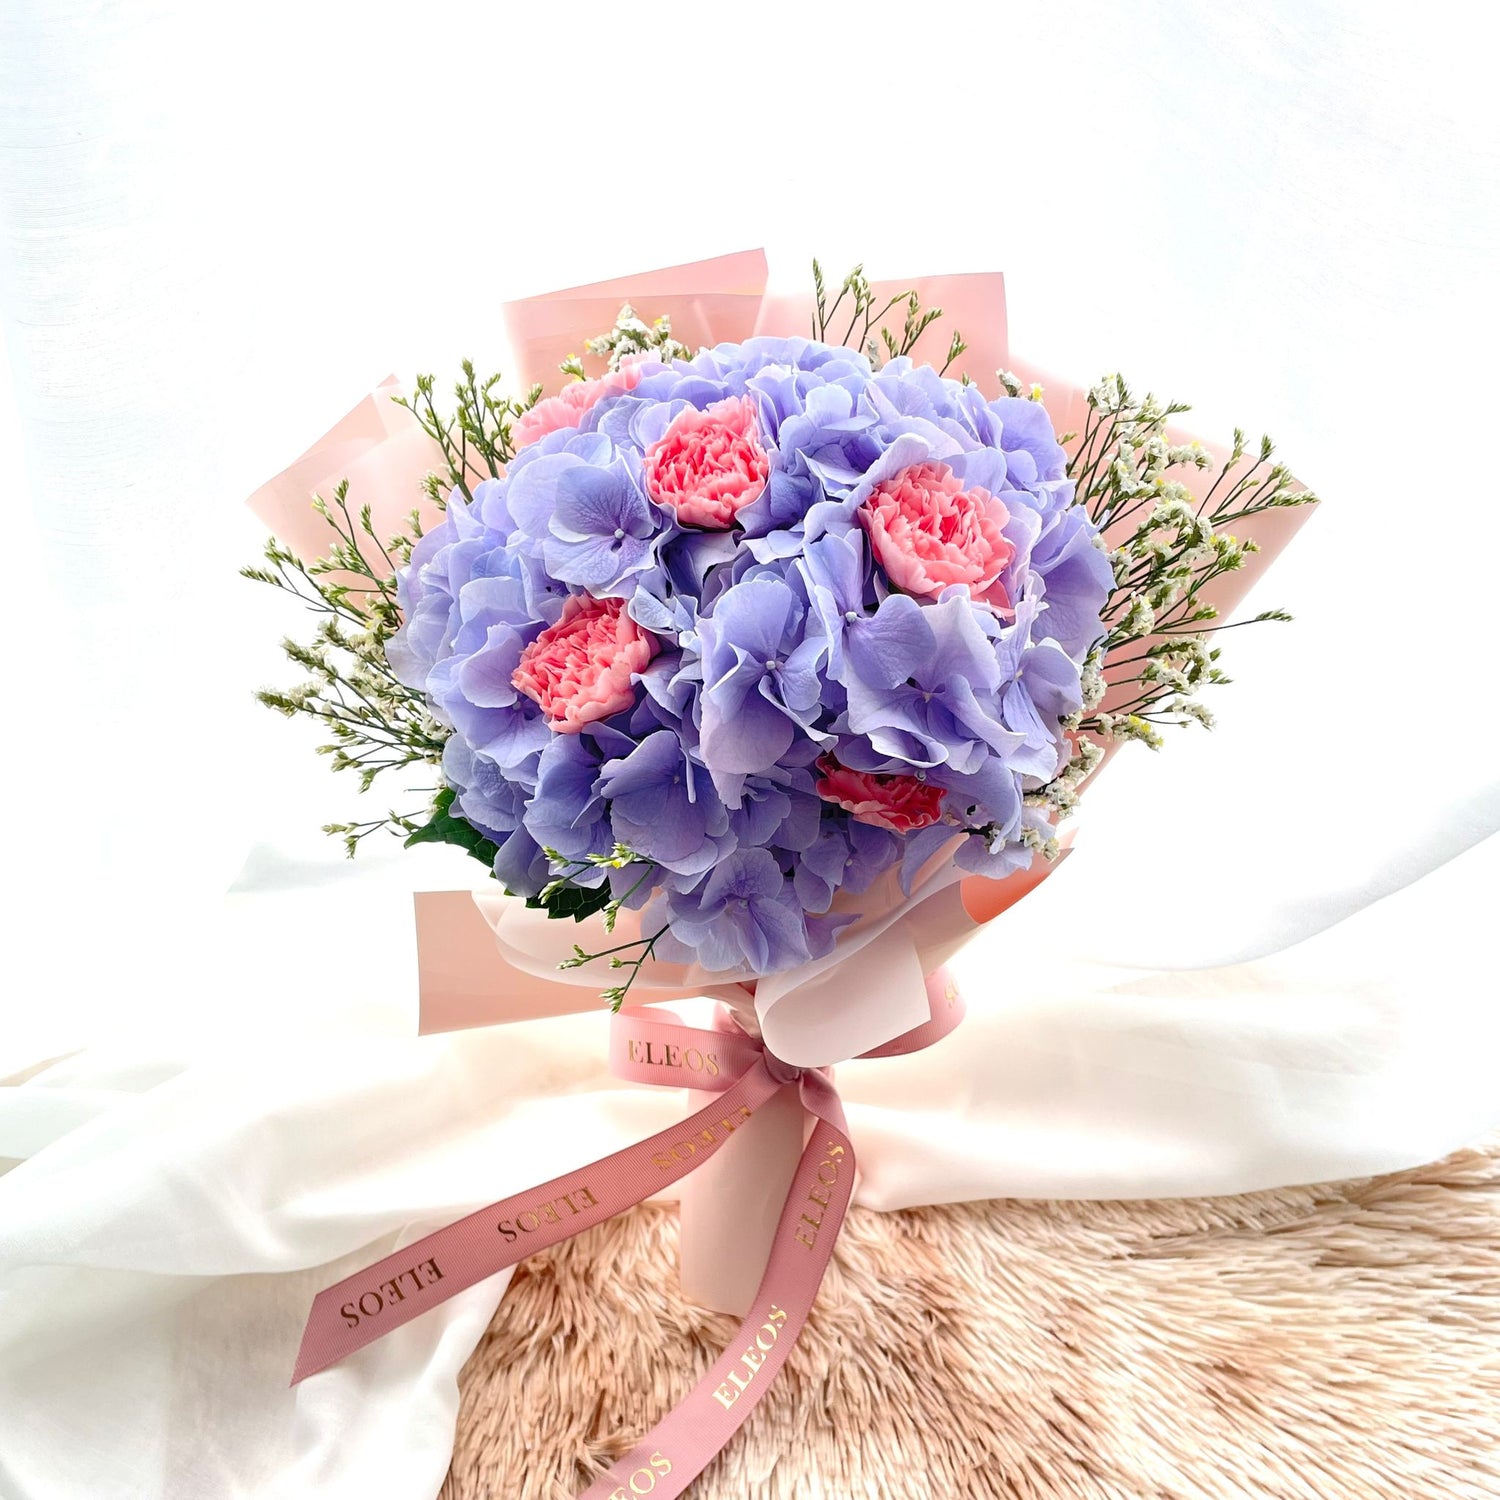 Beautiful and Fresh Hydrangea & Carnation Flower Bouquet Under 80 in Singapore with Free Delivery